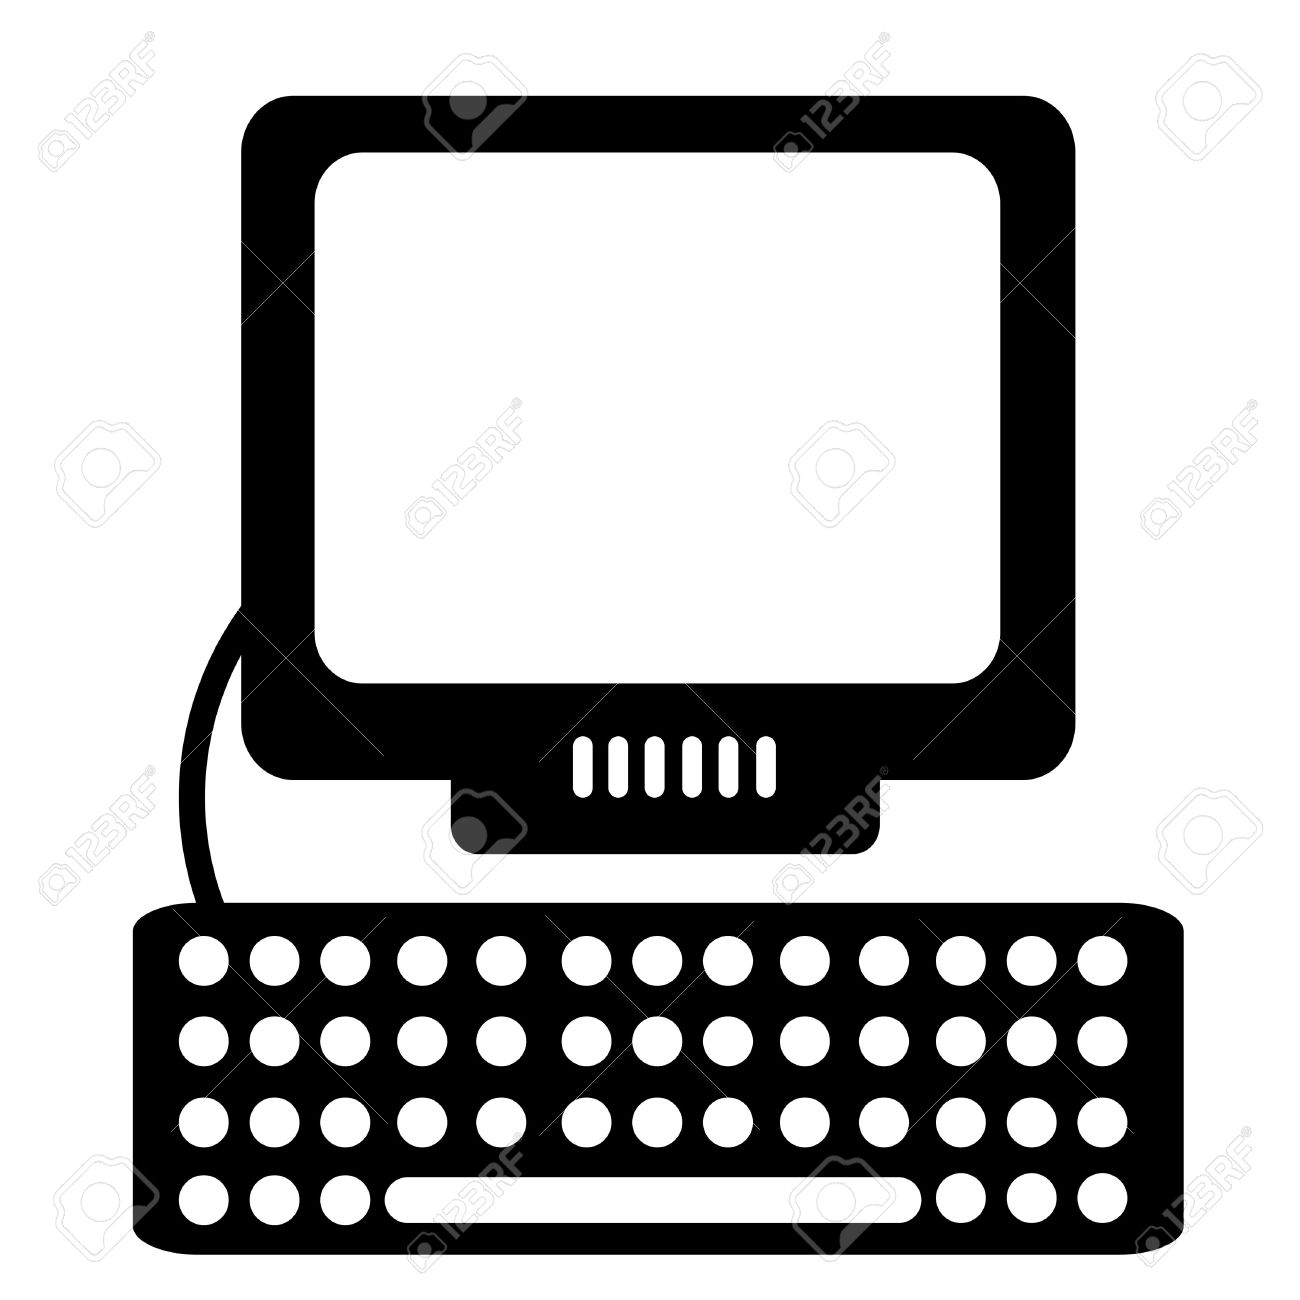 Computer black and white computer clipart black and white.